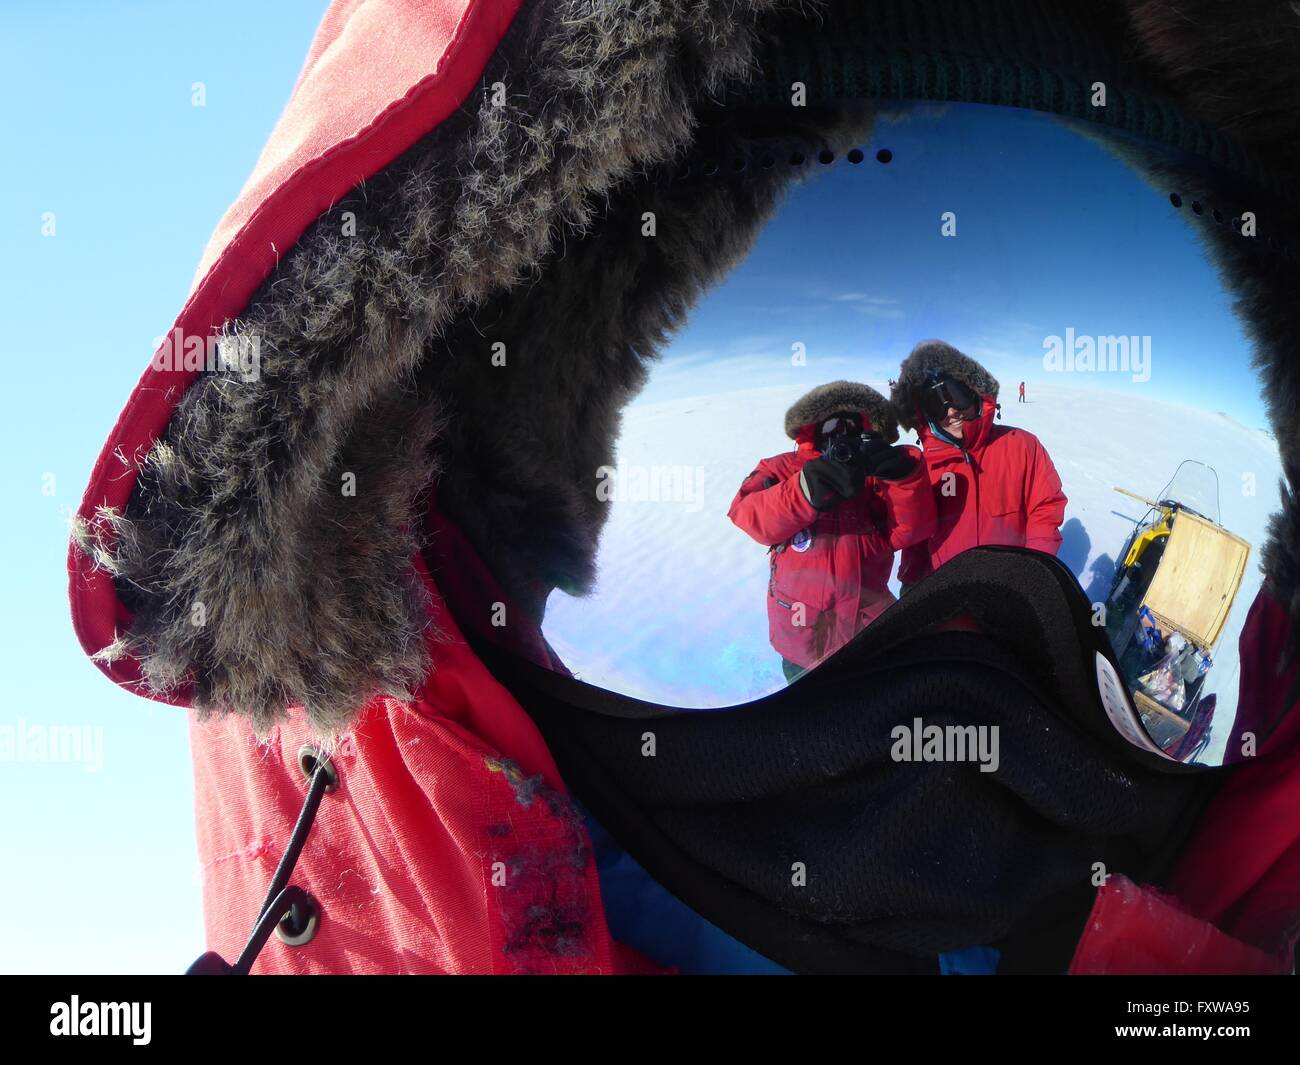 Researchers reflected in the mirror surface of snow goggles while searching for meteorites on the blue ice field in the Miller Range December 31, 2015 in Antarctica. Scientists collected 570 meteorite samples during a two-month expedition as part of the Antarctic Search for Meteorites program. Stock Photo